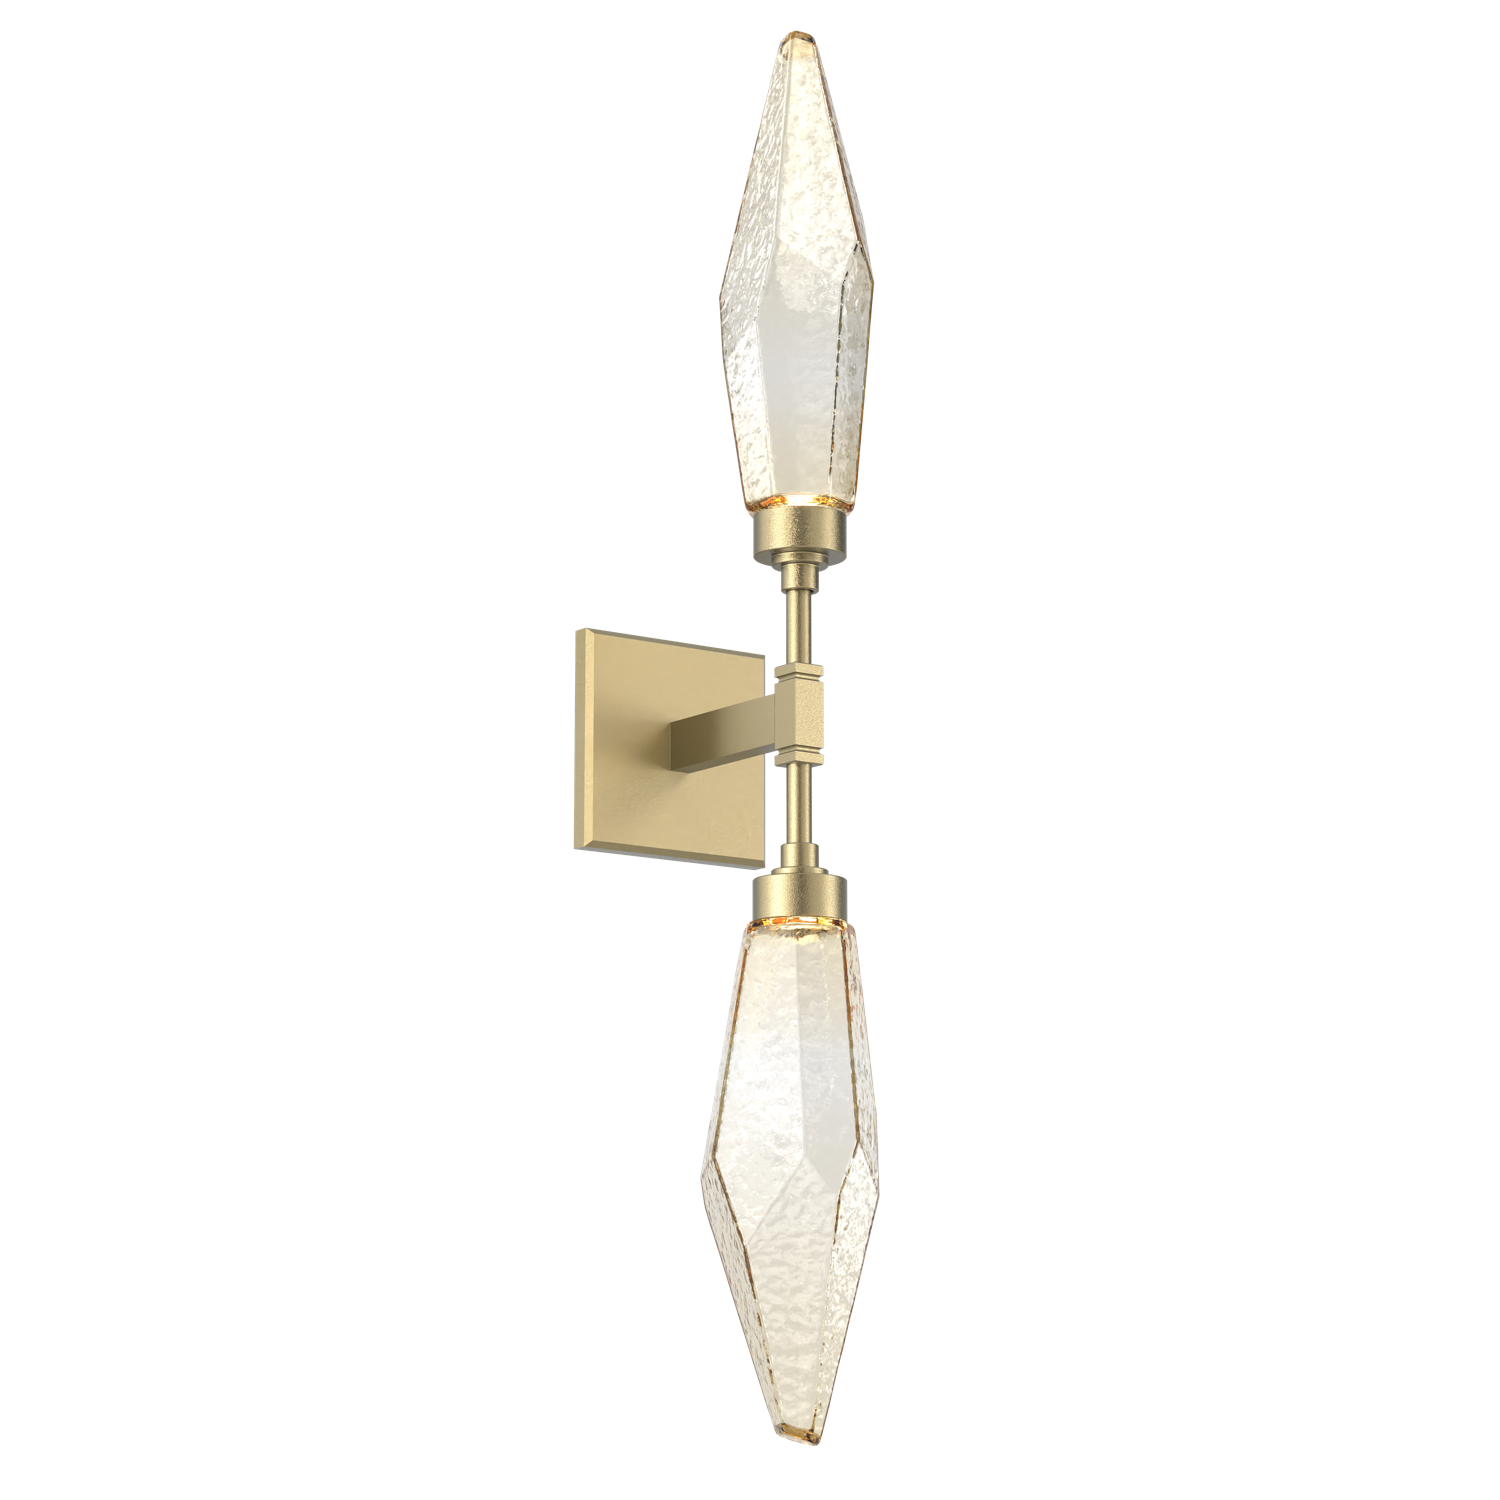 IDB0050-02-GB-CA-Hammerton-Studio-Rock-Crystal-wall-sconce-with-gilded-brass-finish-and-chilled-amber-blown-glass-shades-and-LED-lamping